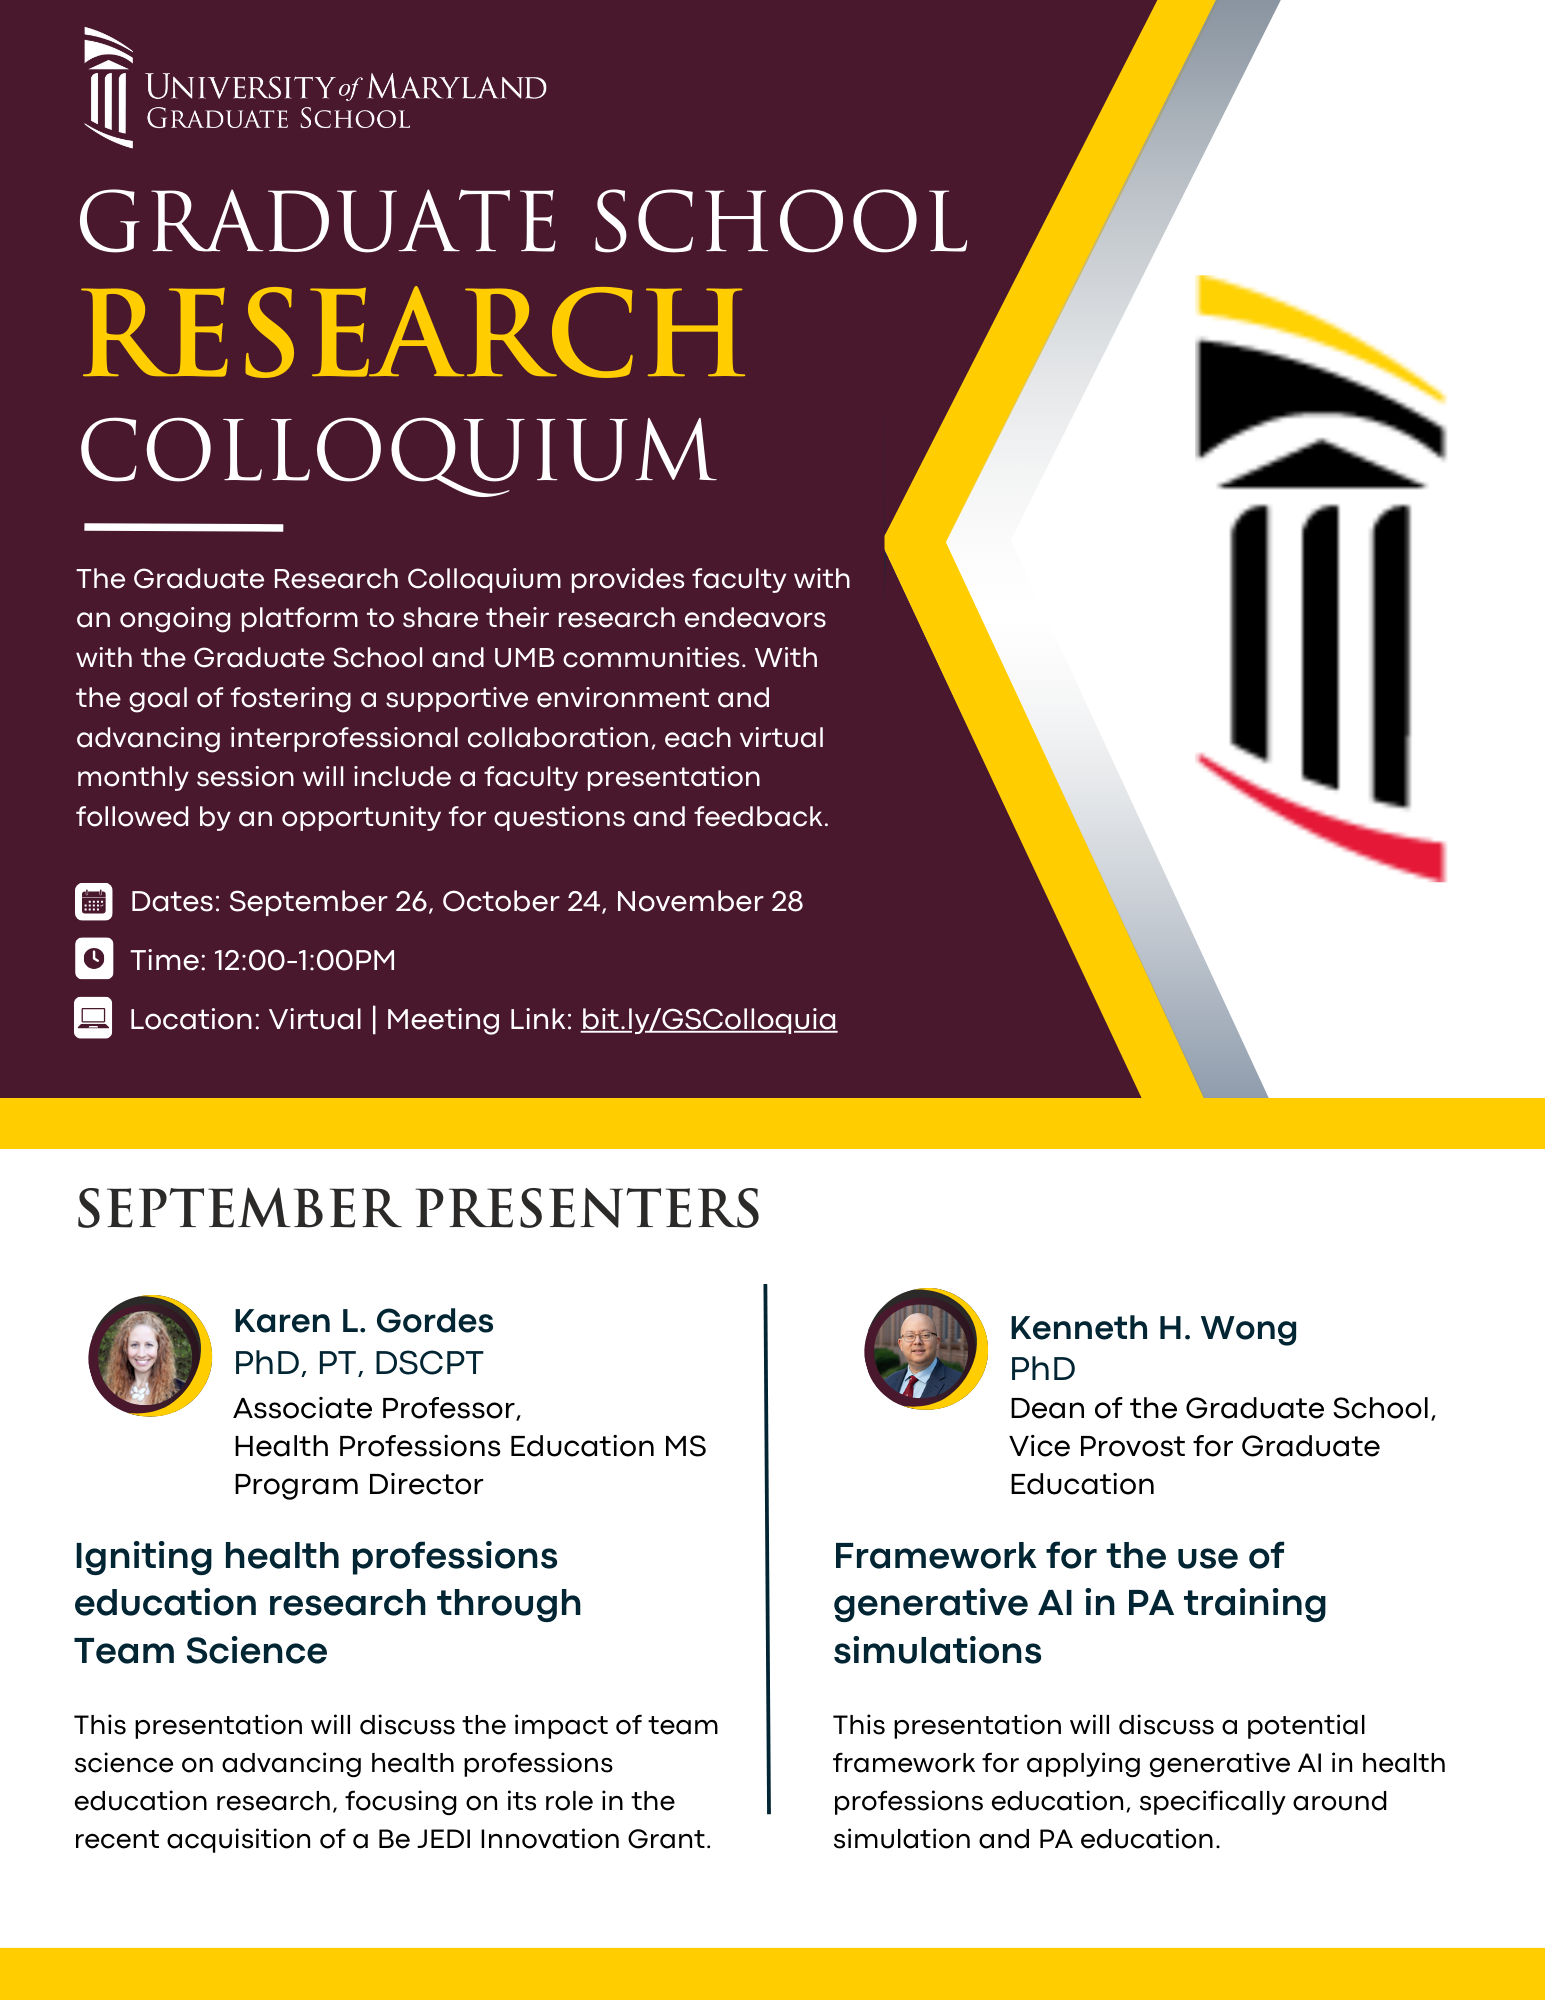 A flyer with details about the September Graduate Research Colloquium